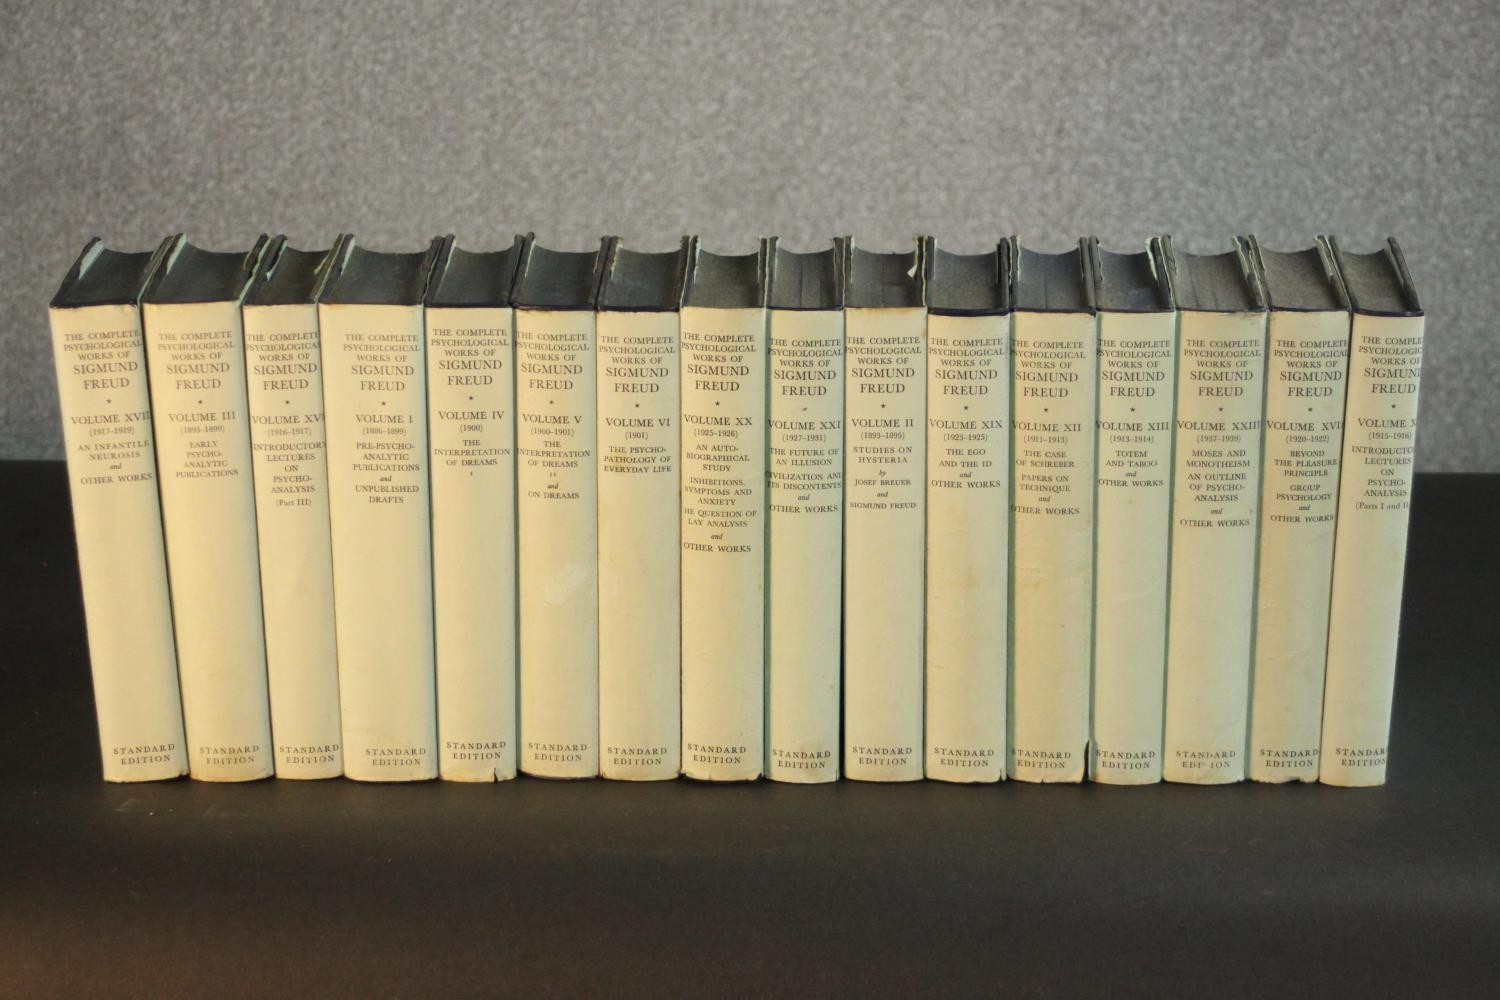 Sixteen volumes of the Complete Psychological Works of Sigmund Freud and other works by Sigmund